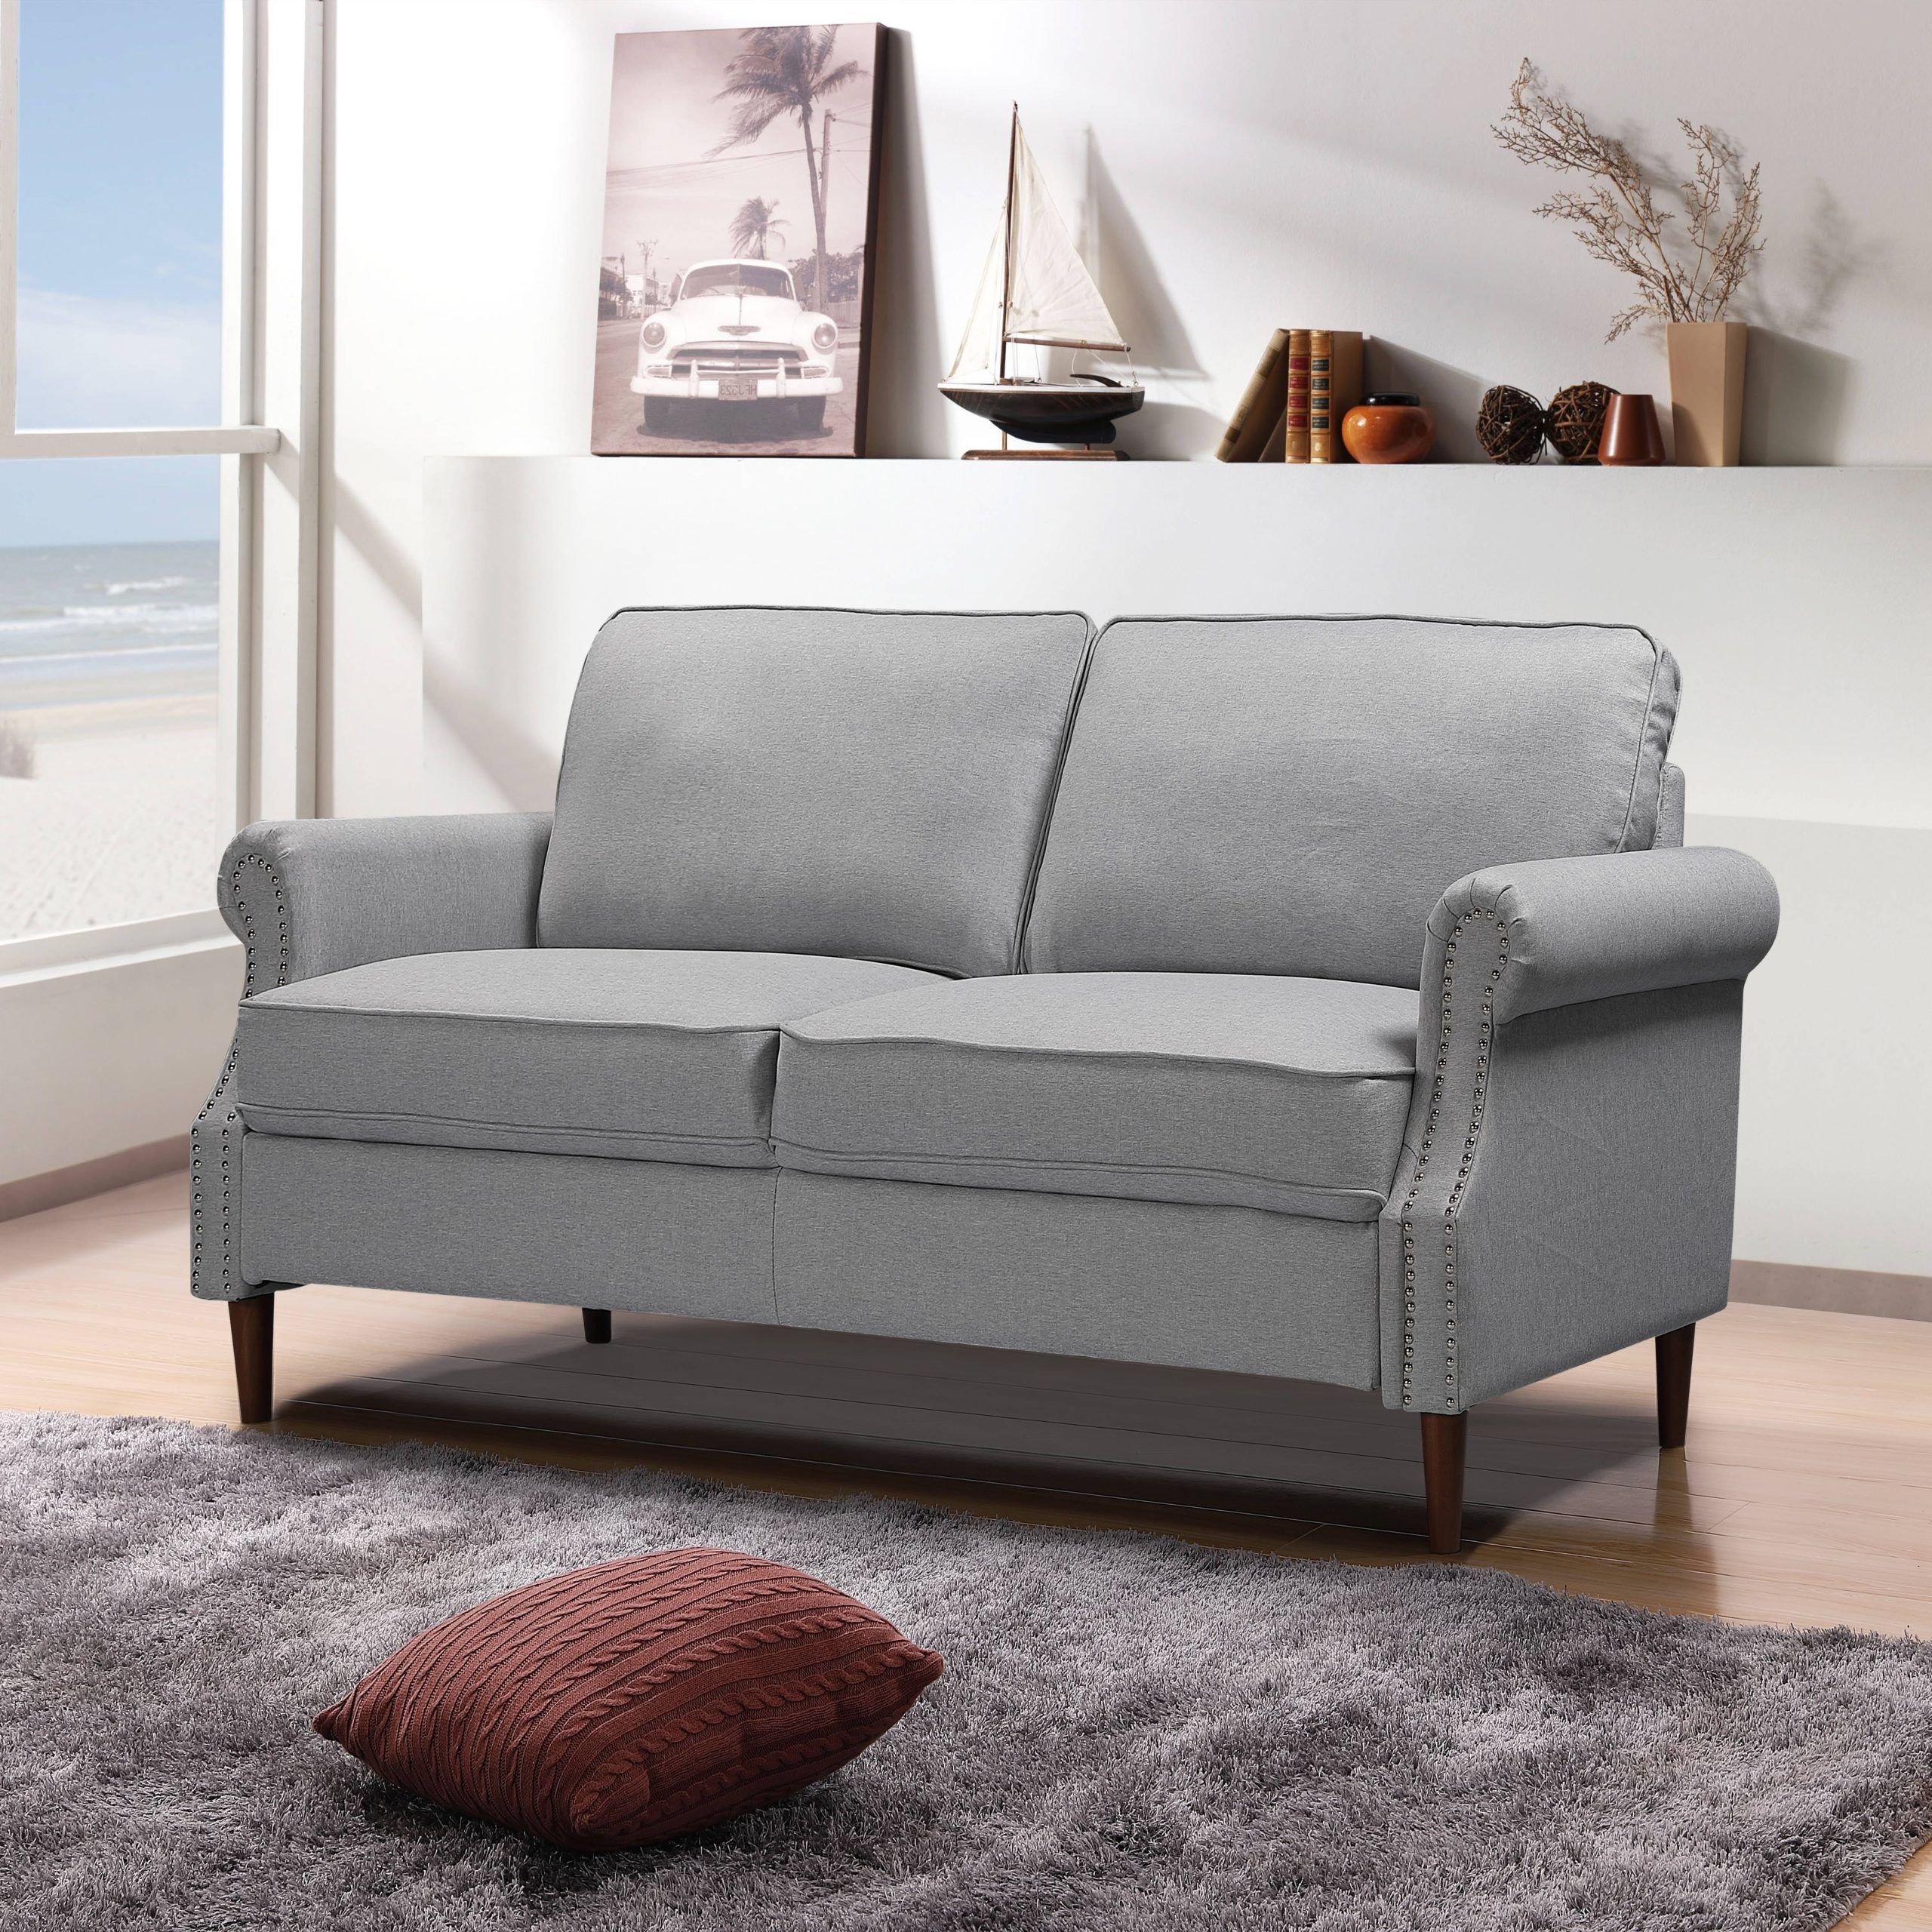 Gray Loveseat, Modern Linen Farbic Sofas For Small Spaces, Upholstered Intended For Modern Light Grey Loveseat Sofas (View 19 of 20)